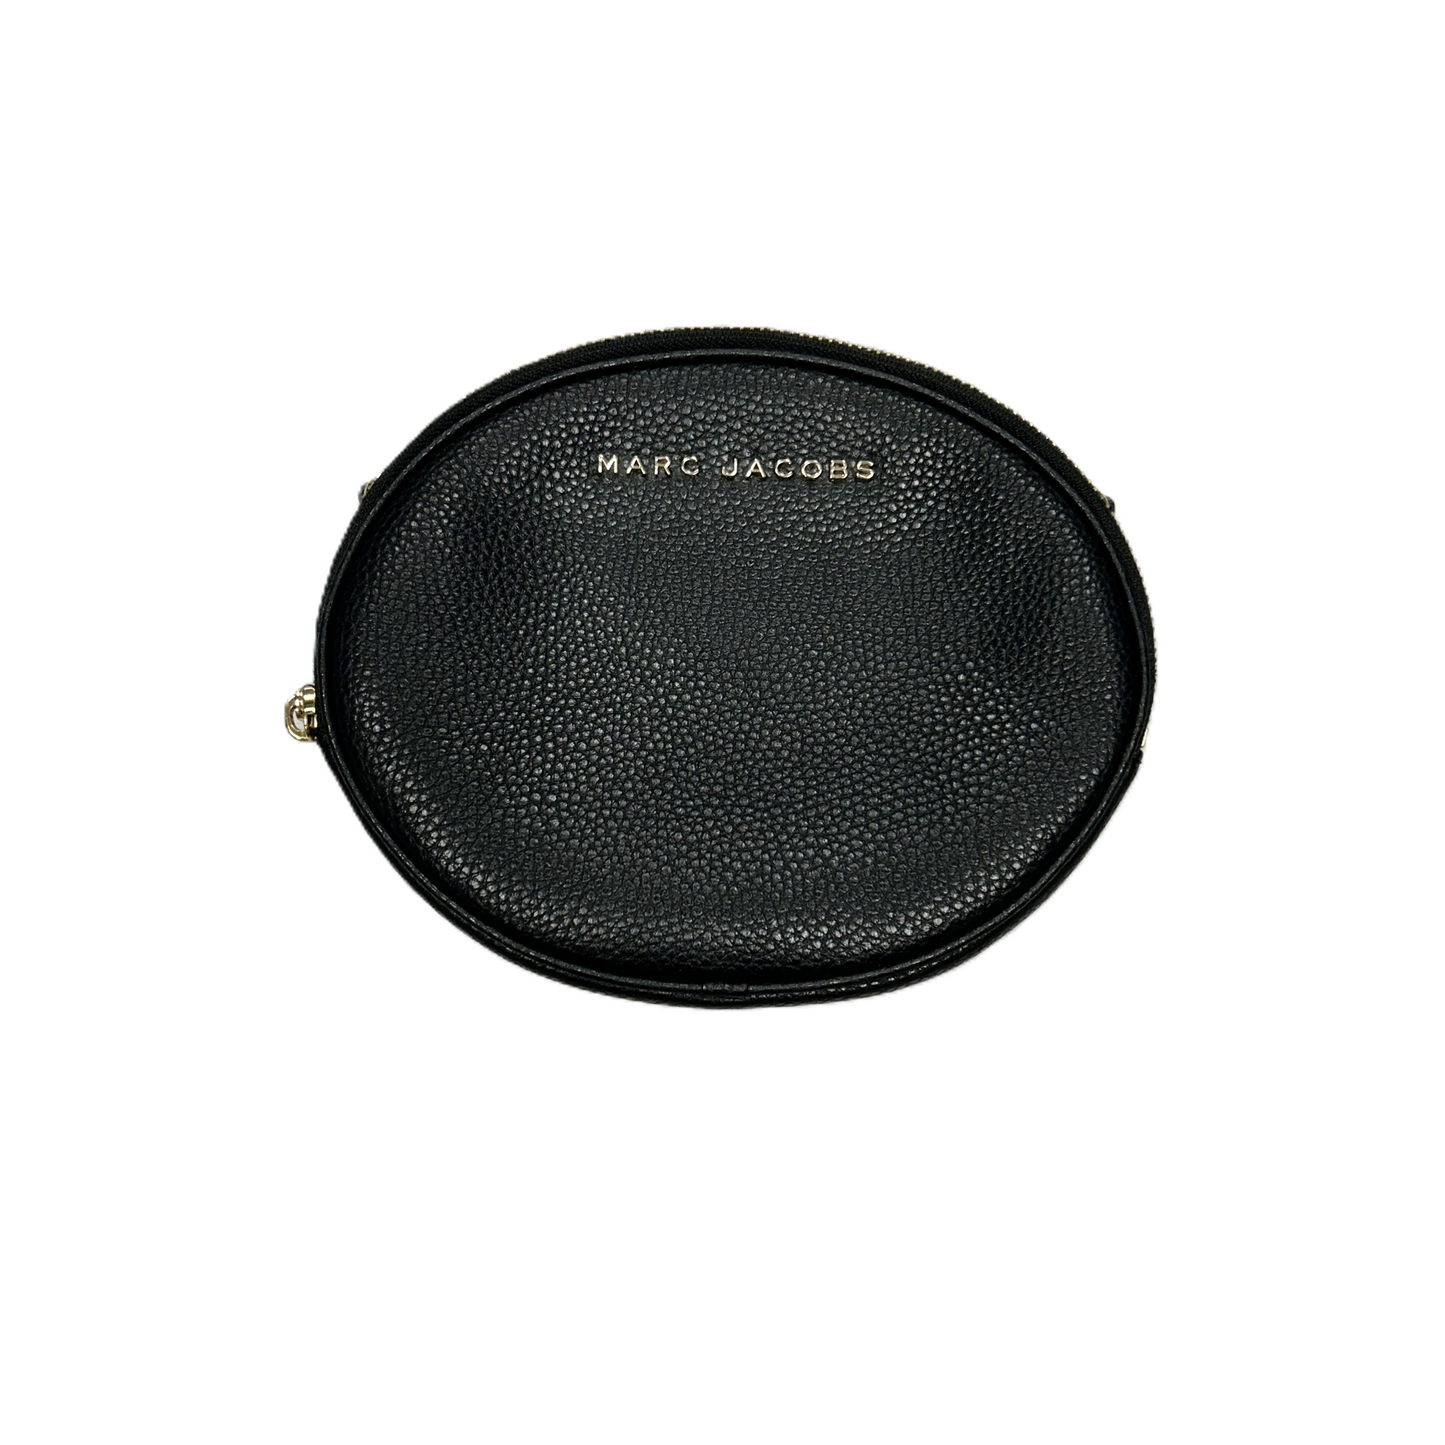 Clutch Designer By Marc Jacobs, Size: Small